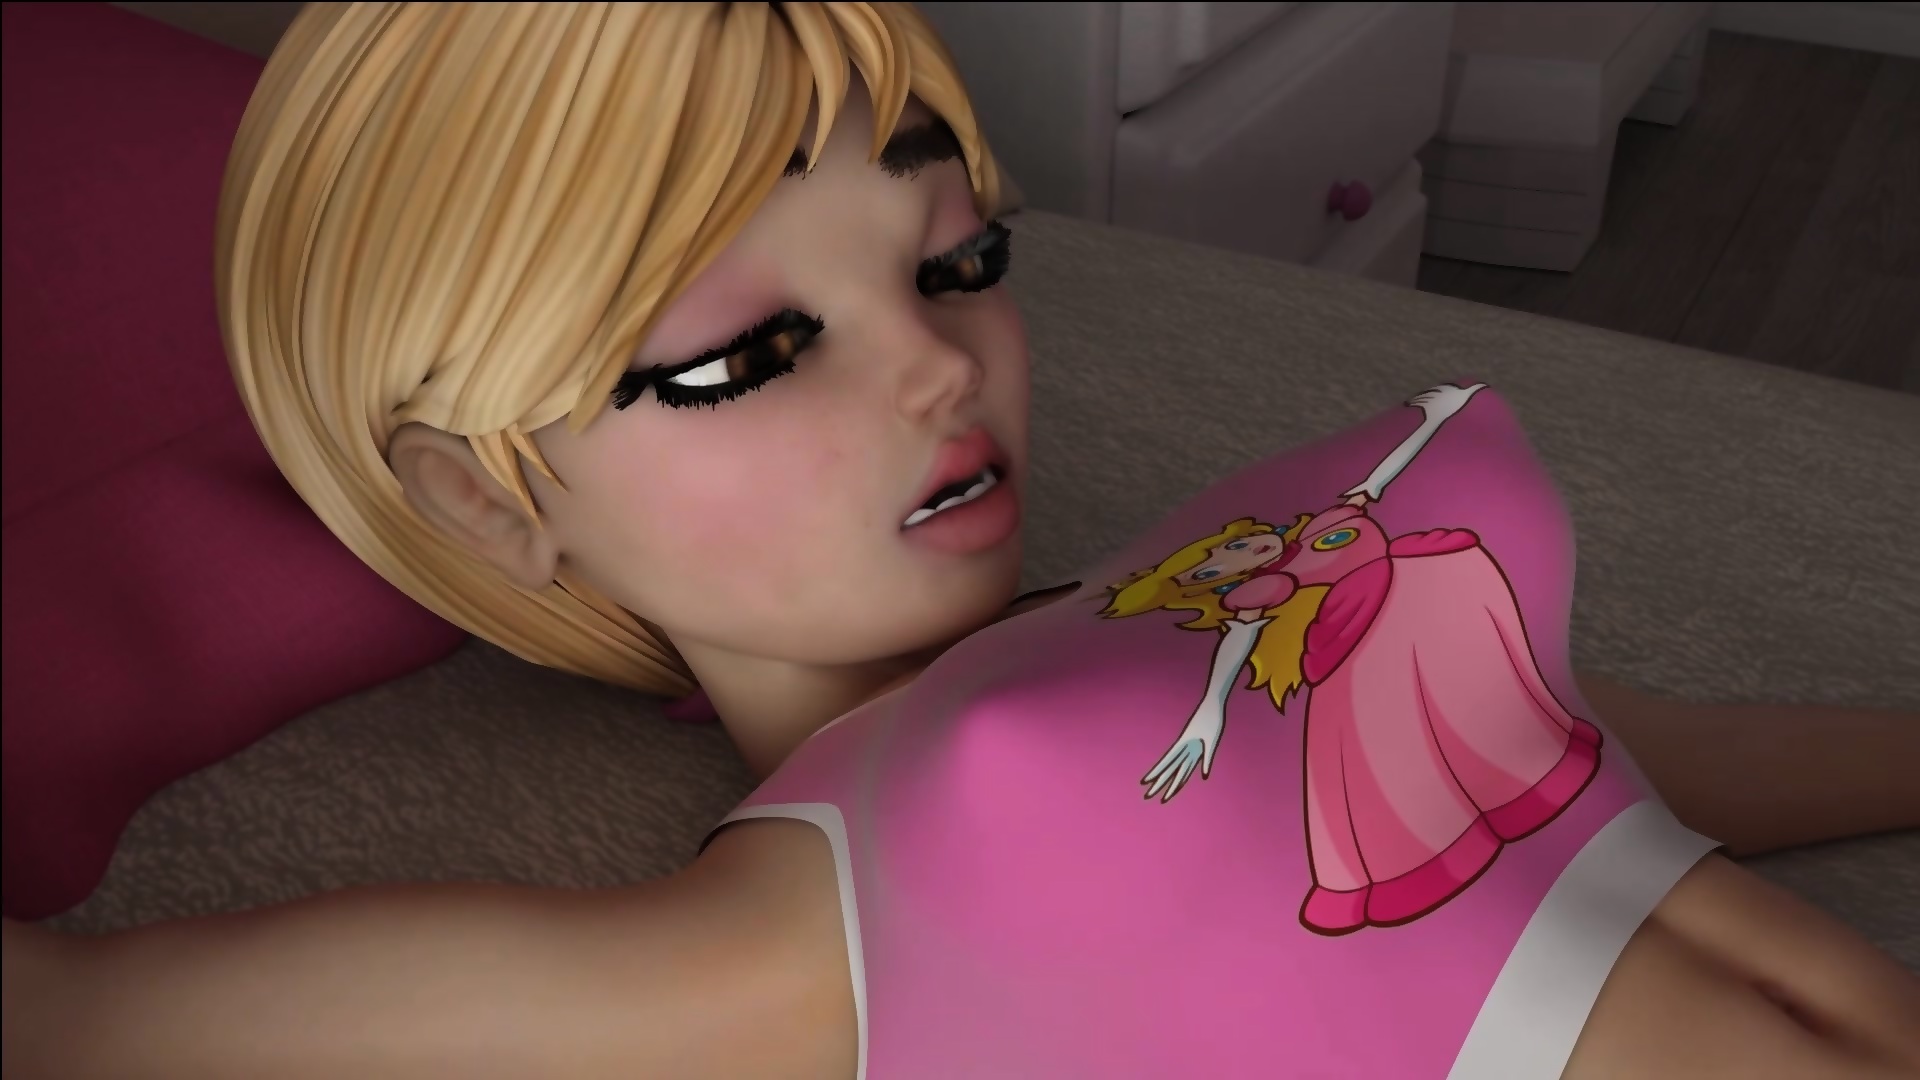 Big Dick Girls Cartoon - Sucking One Girl With Big Cock And - 3D Animation - EPORNER